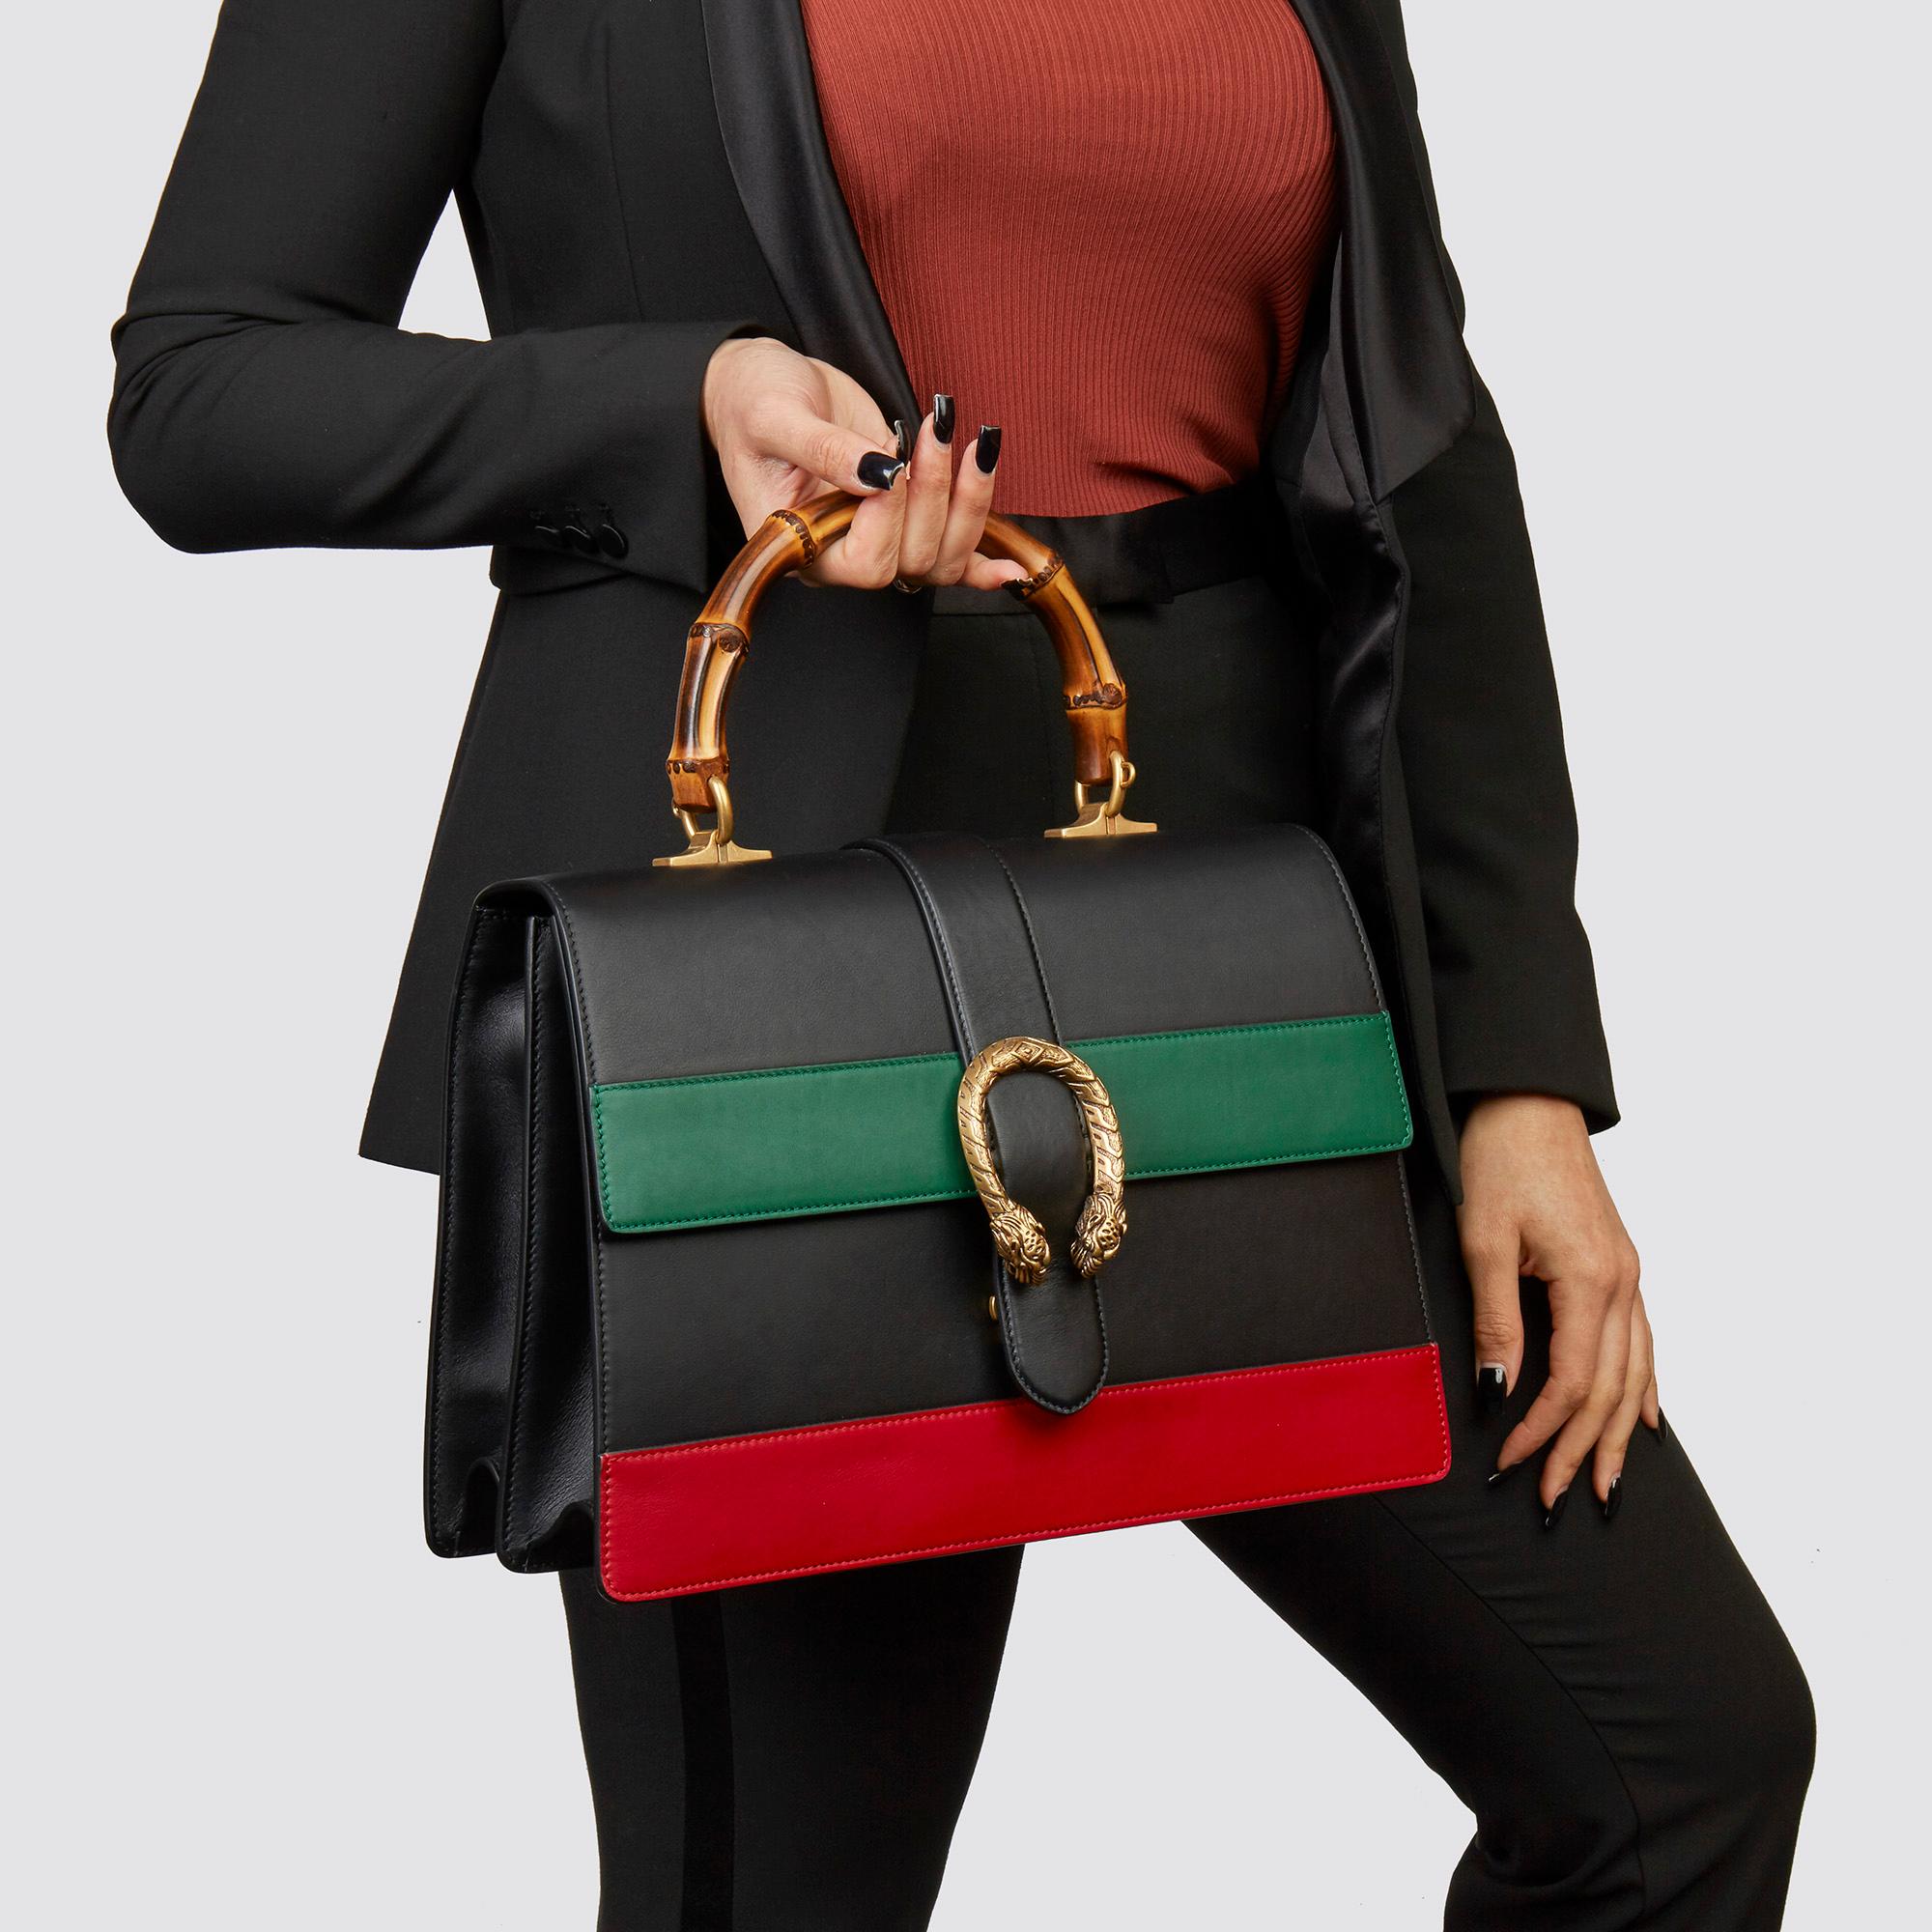 GUCCI
Black, Green & Red Smooth Calfskin Leather Large Dionysus Bamboo Top Handle 

Xupes Reference: HB3607
Serial Number: 421999 001998
Age (Circa): 2020
Accompanied By: Gucci Dust Bag, Care Booklet, Leather Shoulder Strap, Canvas Sports Strap